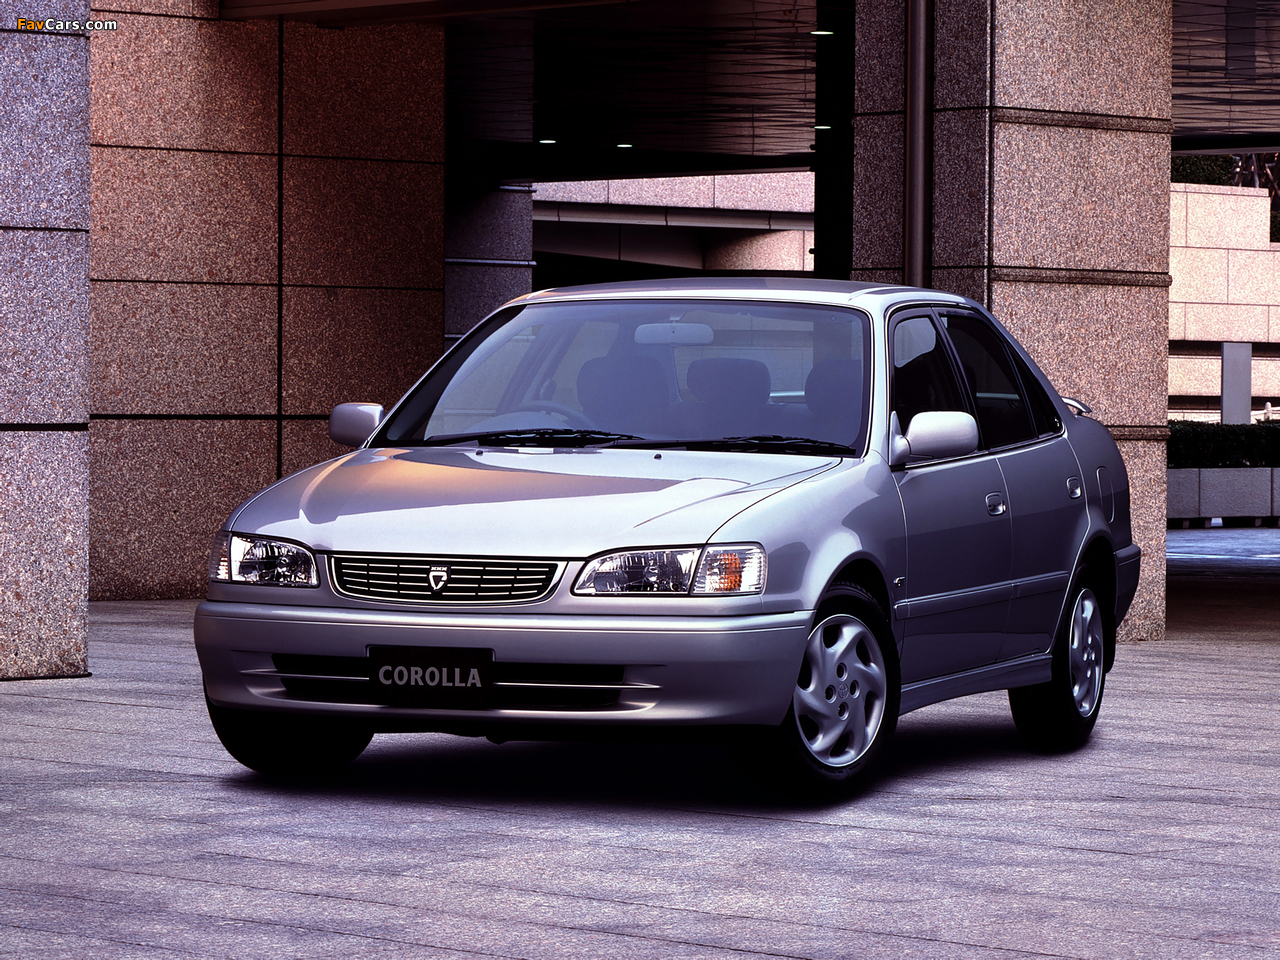 Toyota Corolla 1.6 GT (AE111) 1997–2000 images (1280 x 960)